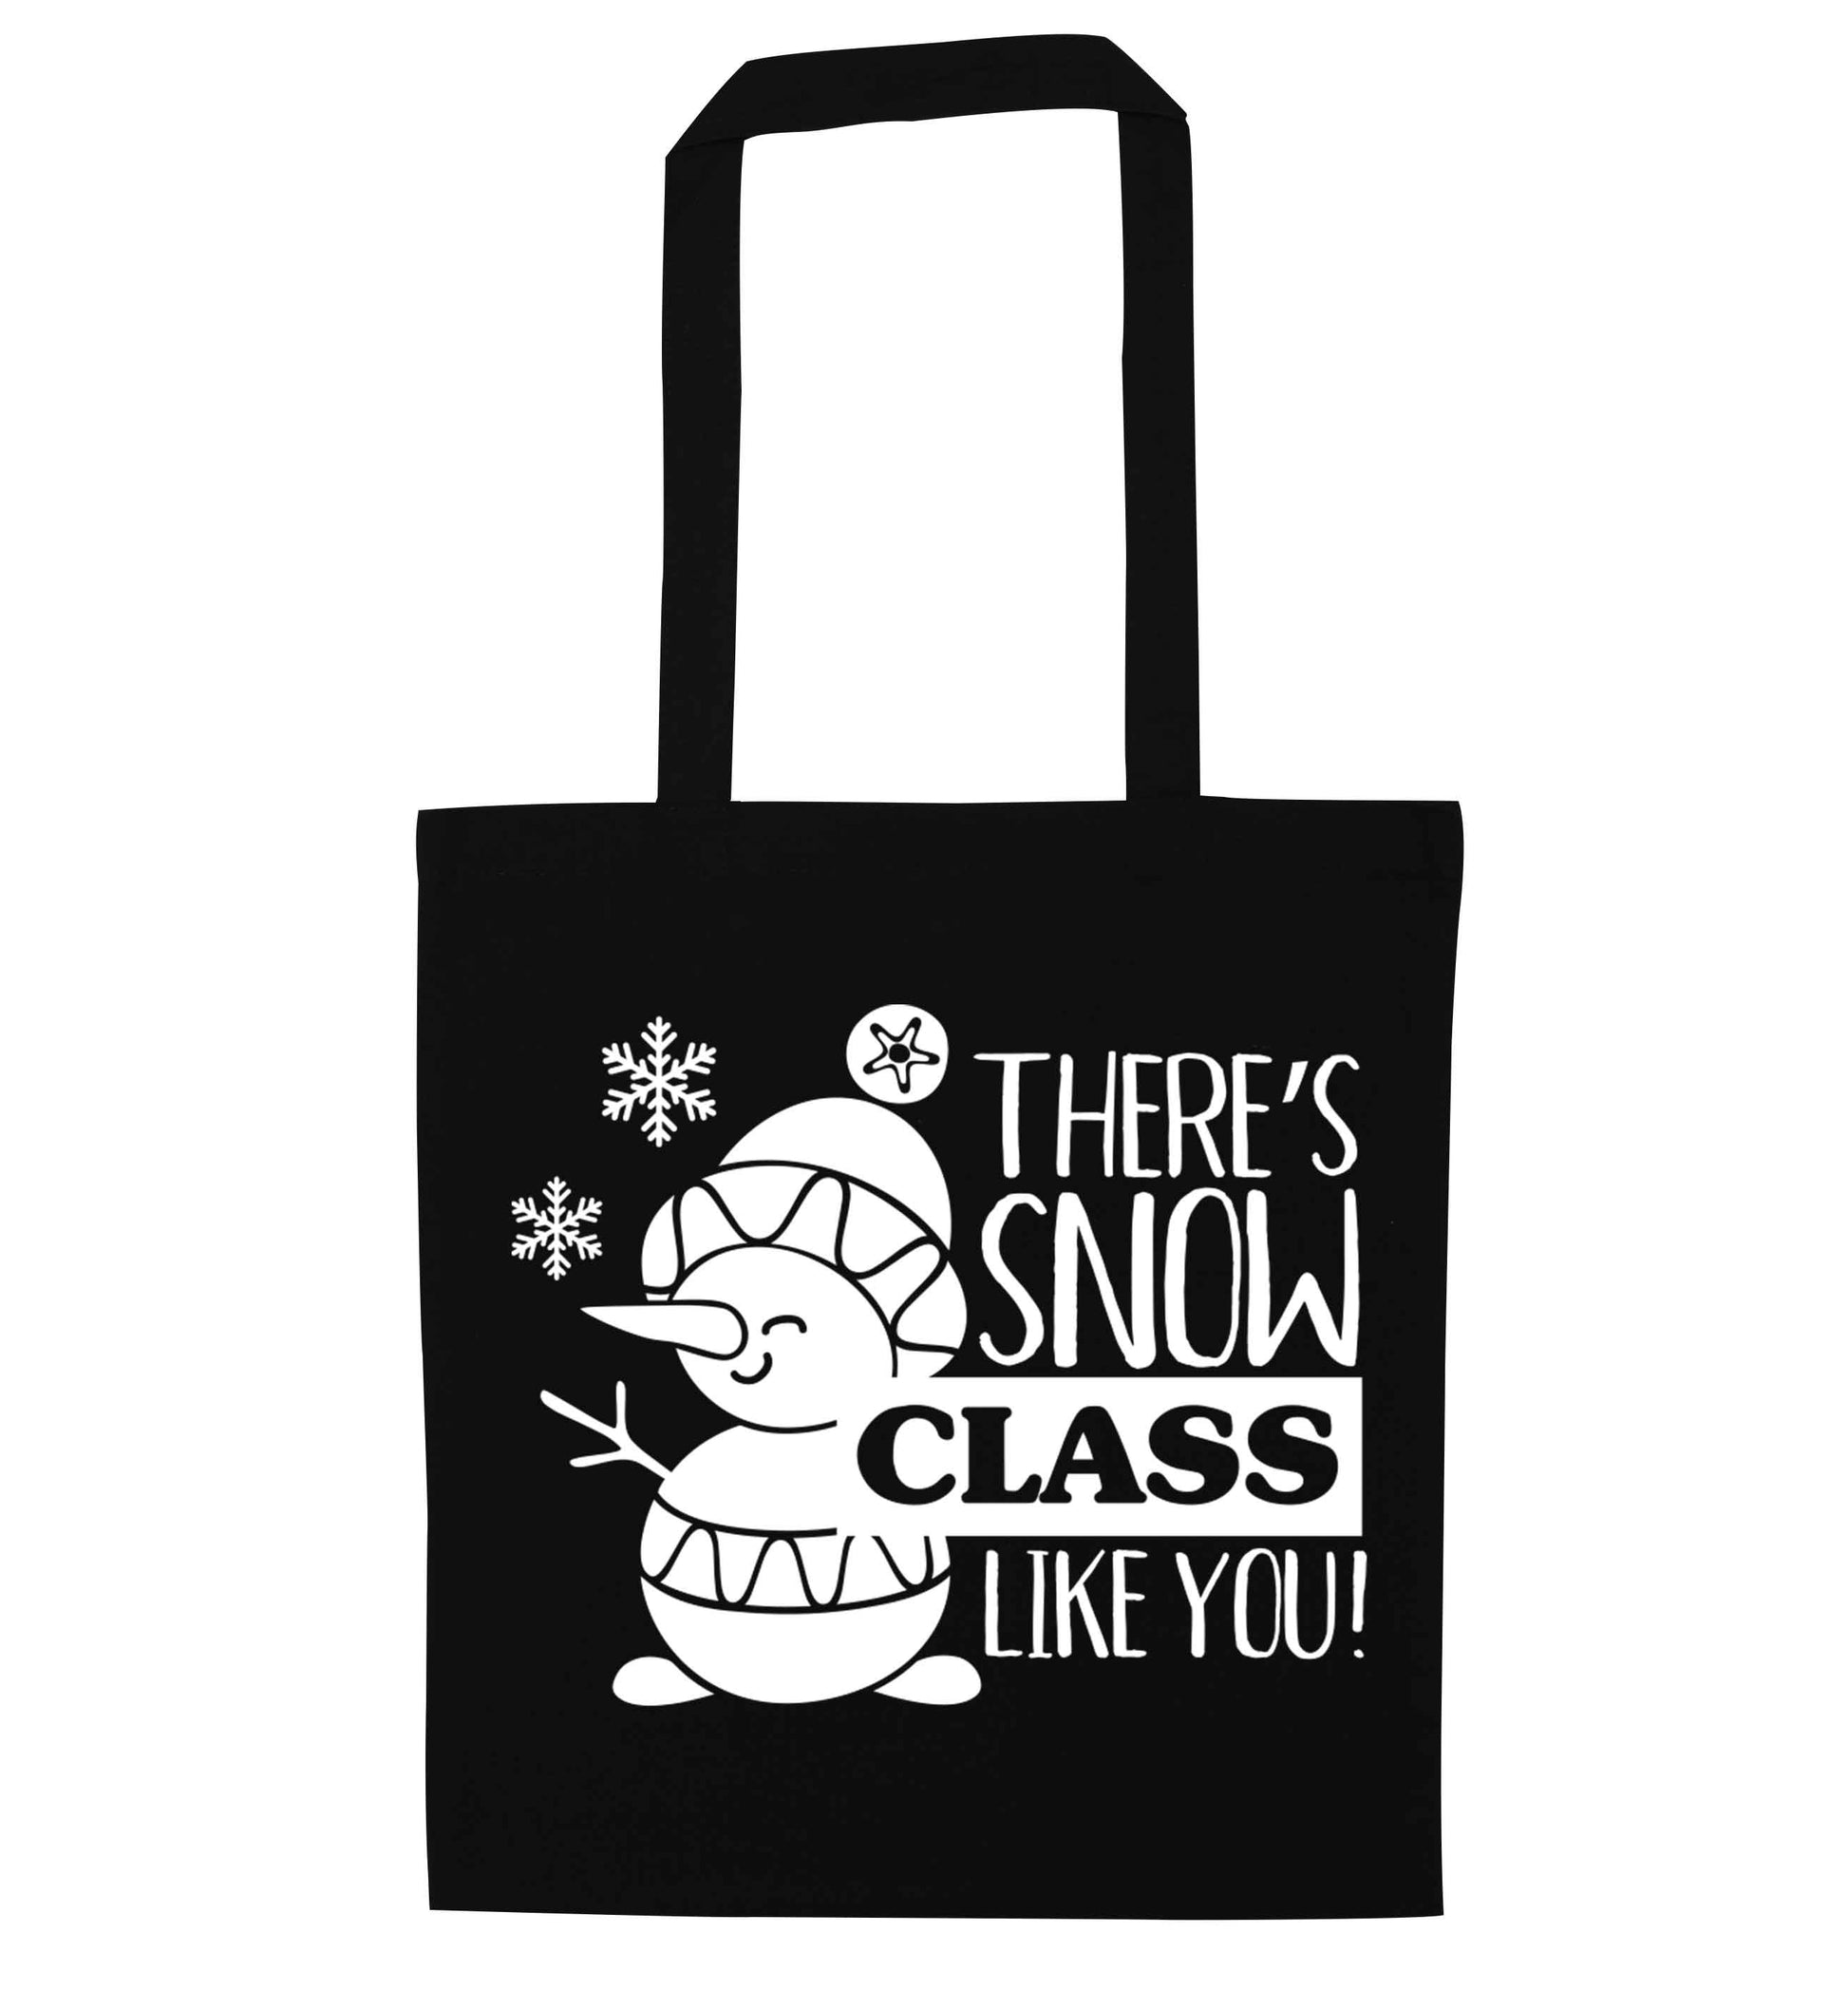 There's snow class like you black tote bag